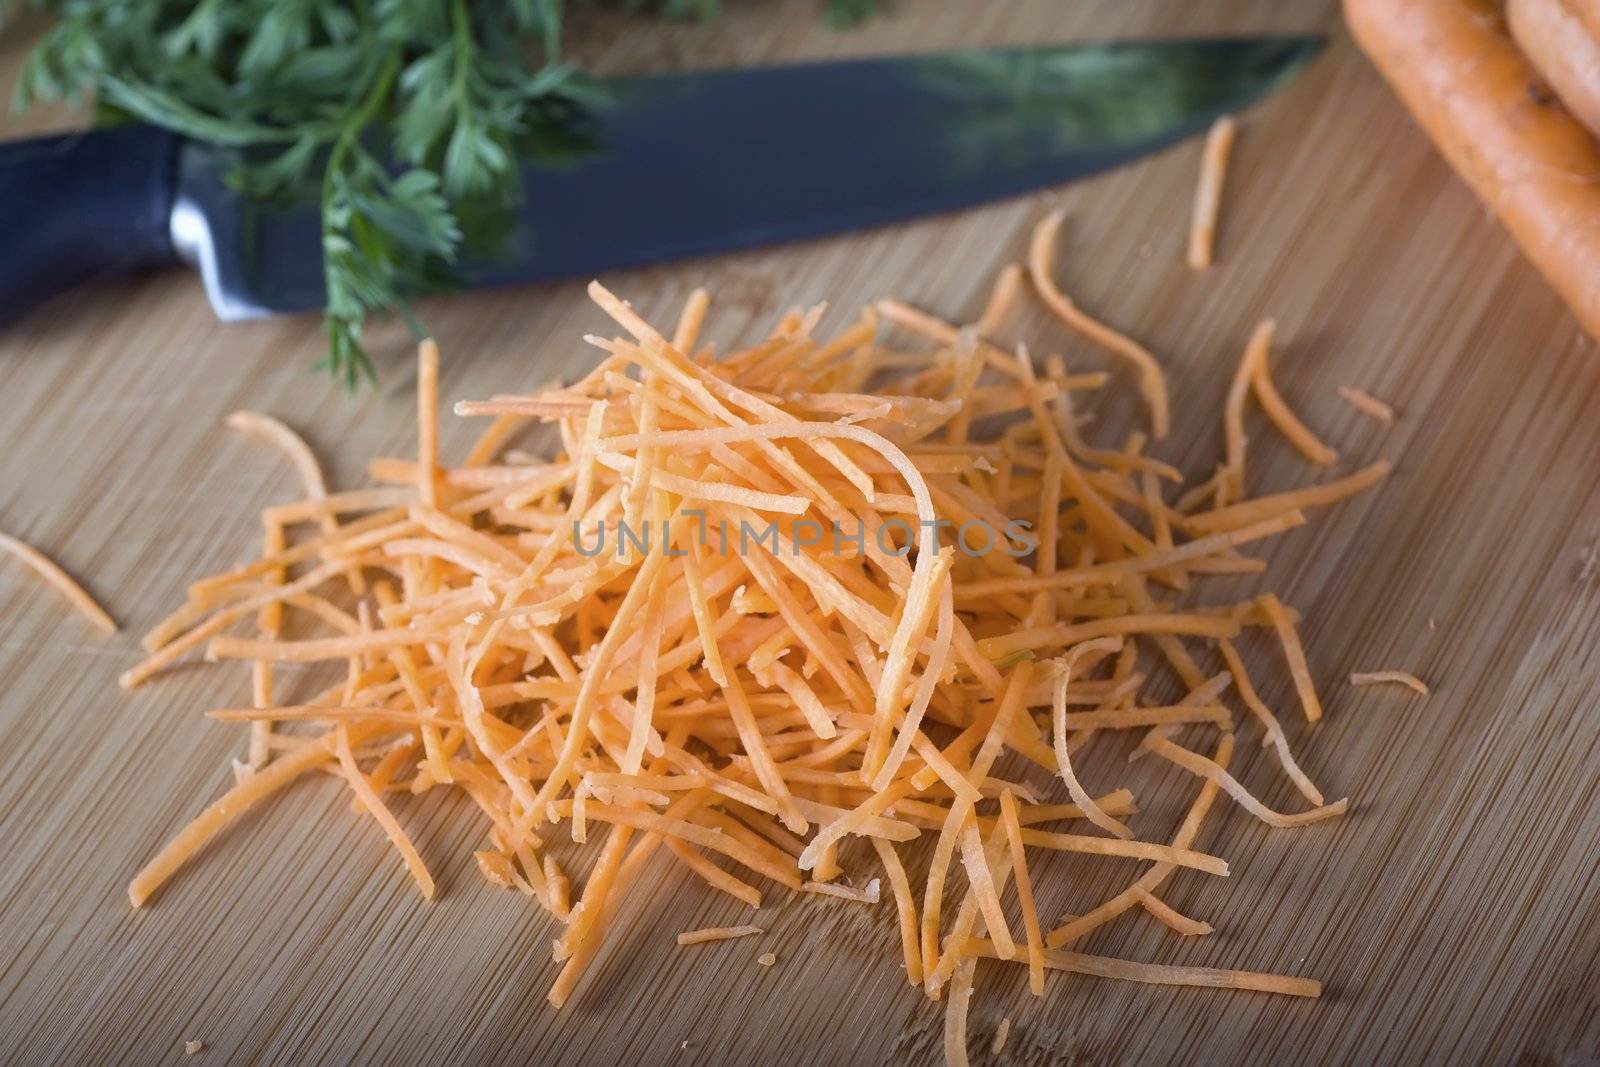 Finely shredded carrots on cutting board with knife.  